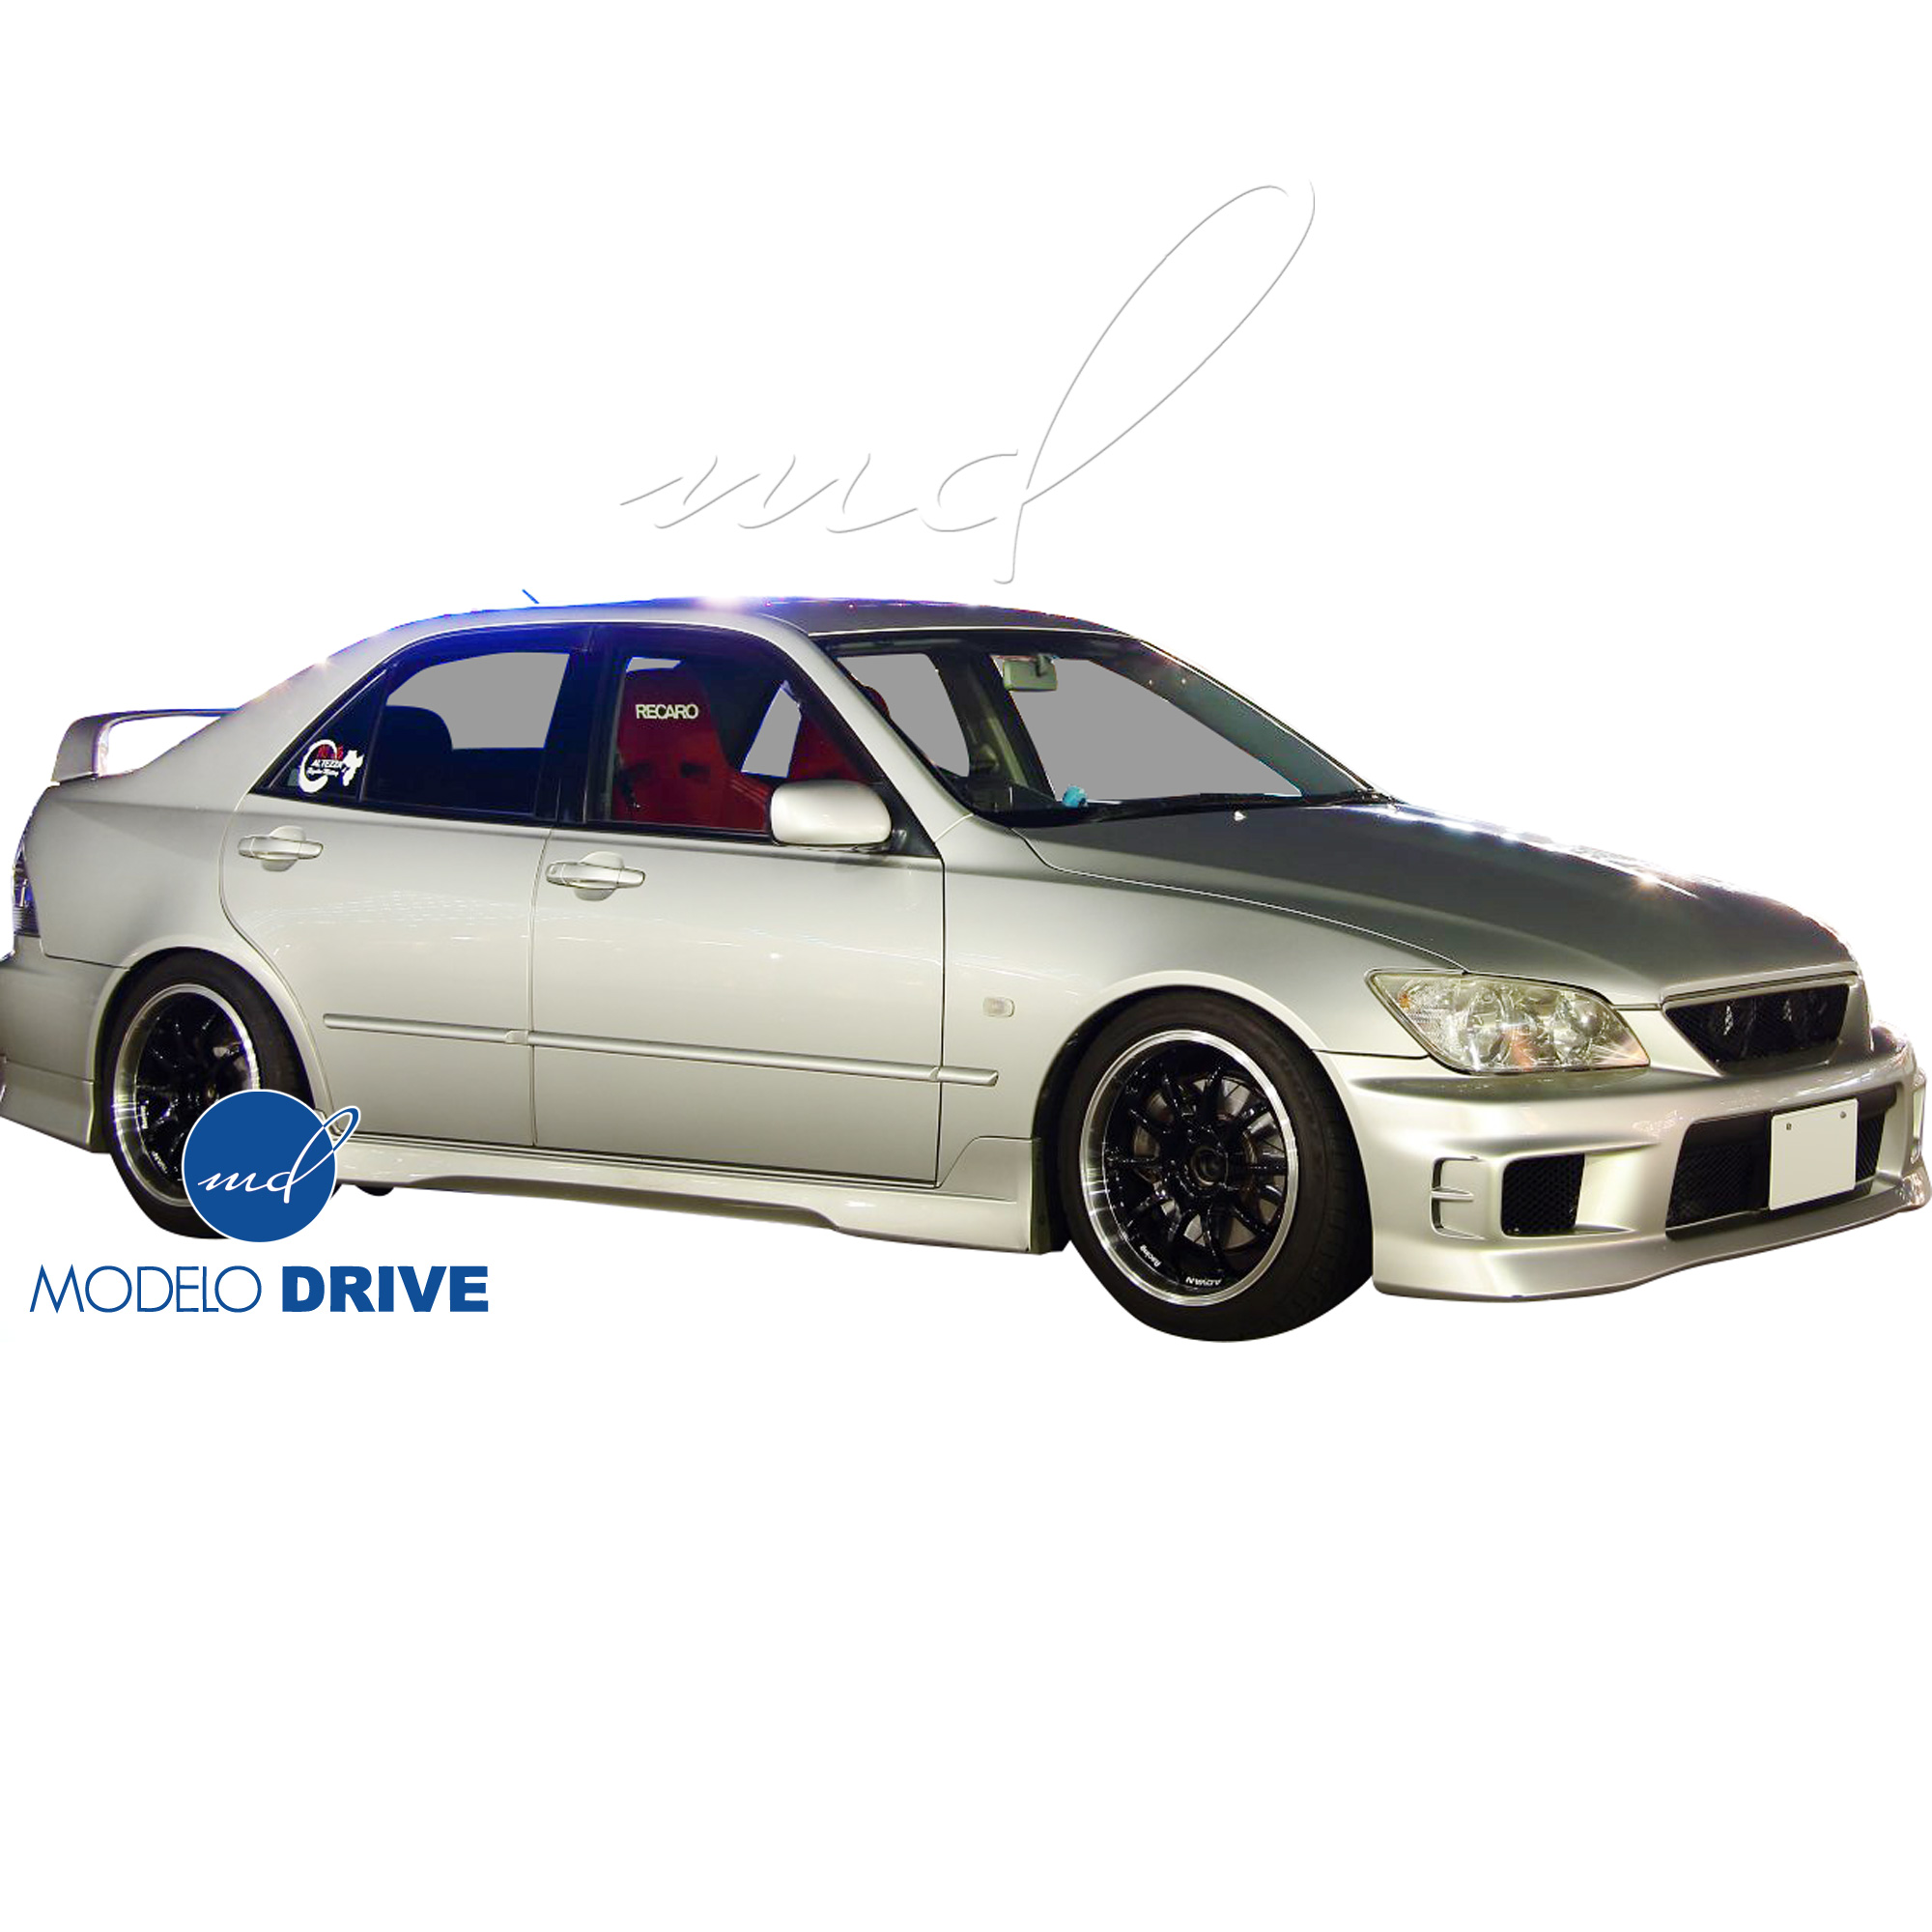 ModeloDrive FRP TD Neo v2 Front Bumper > Lexus IS-Series IS300 2000-2005 - Image 7